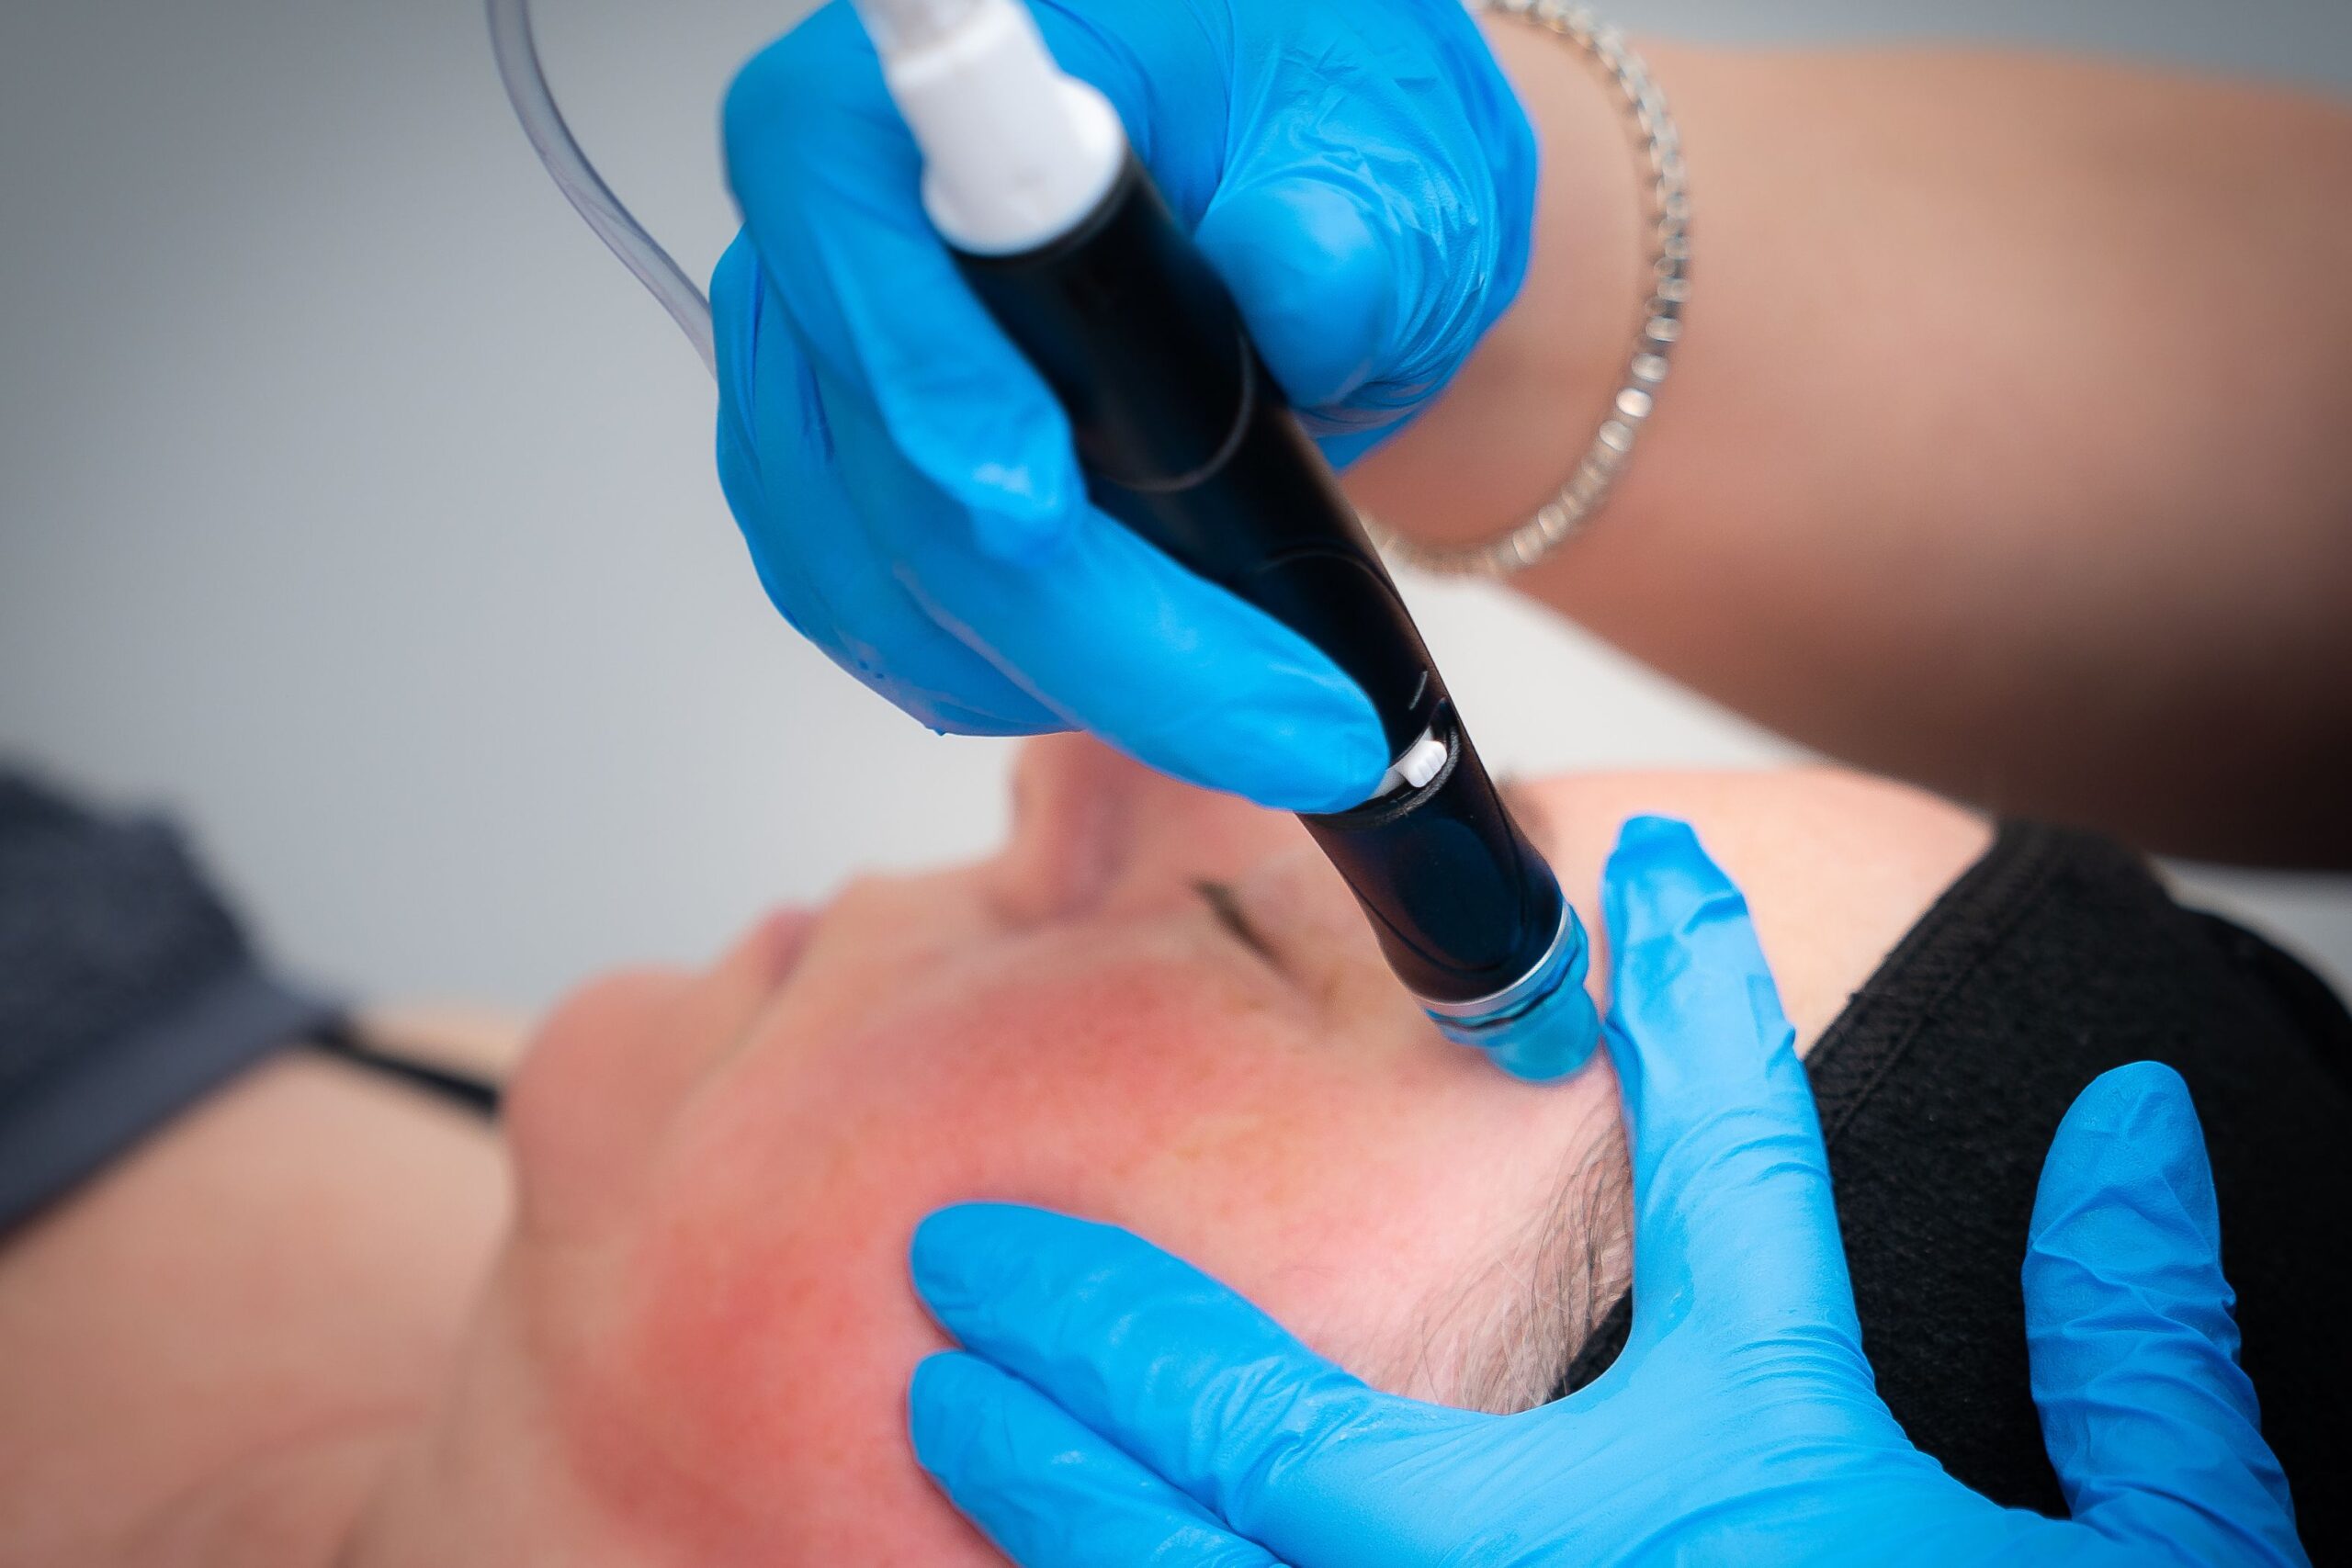 HydraFacial for Blackheads at Freyja Medical in Wrexham, Nantwich and Cheshire